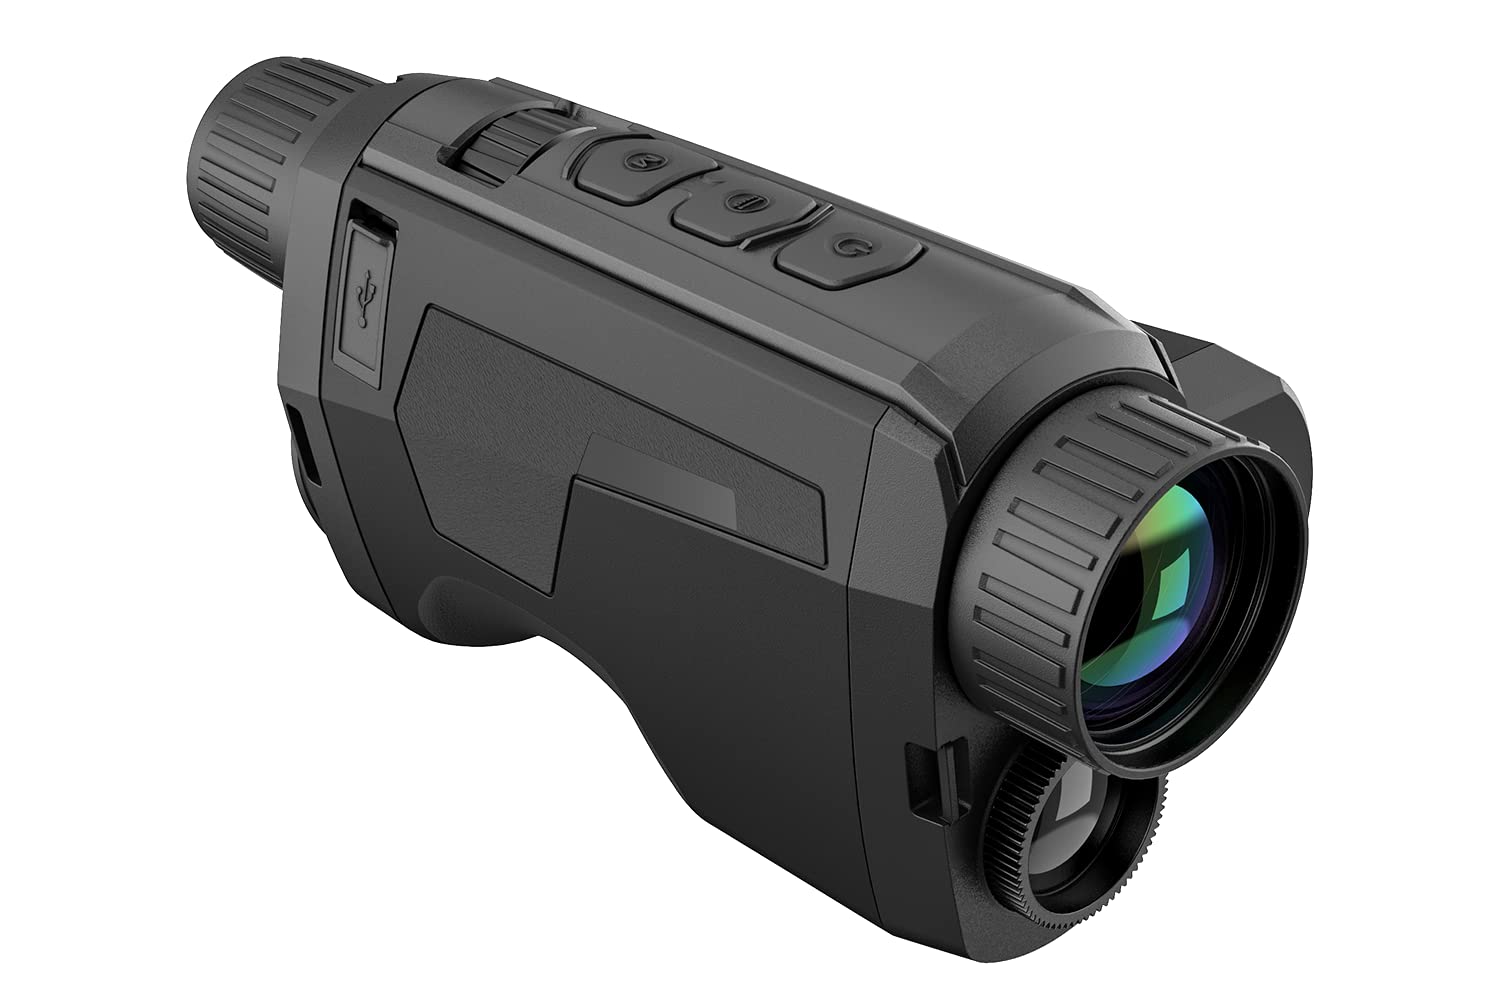 AGM Global Vision Fuzion LRF TM35-640 Thermal Monocular with Laser Rangefinder and Bi-Spectrum Image Fusion Hunting Monocular with Thermal Imaging Heat Vision Perfect for Hunting and Outdoor Adventure